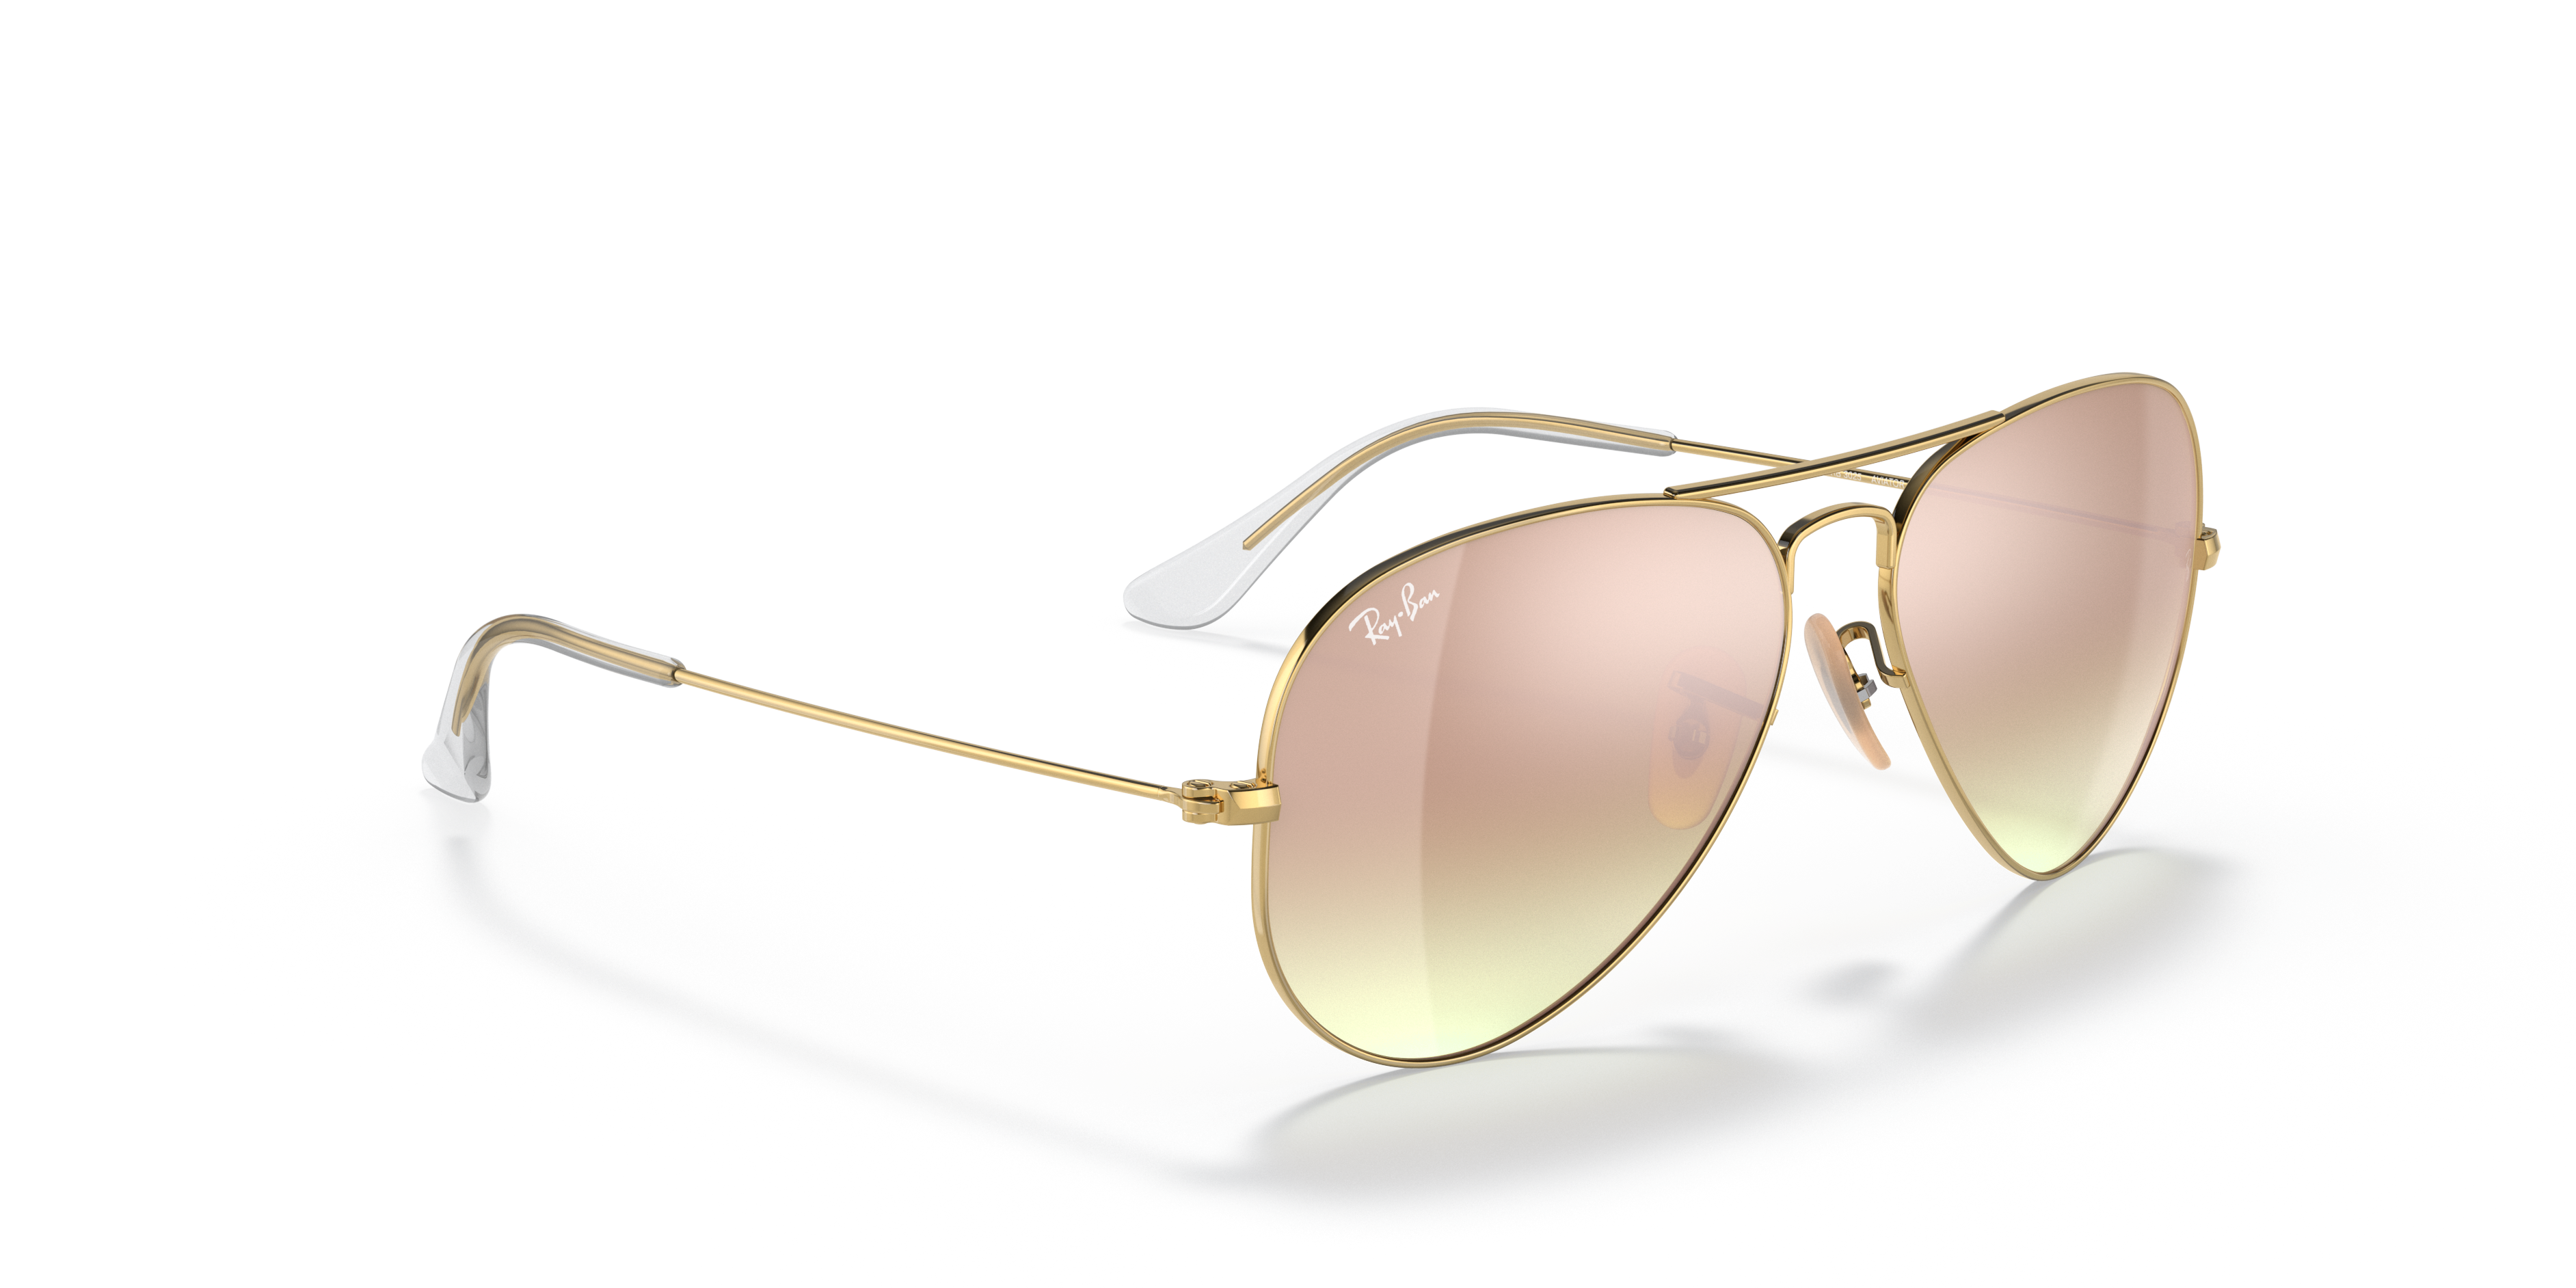 Aviator Mirror Sunglasses in Gold and Pink | Ray-Ban®